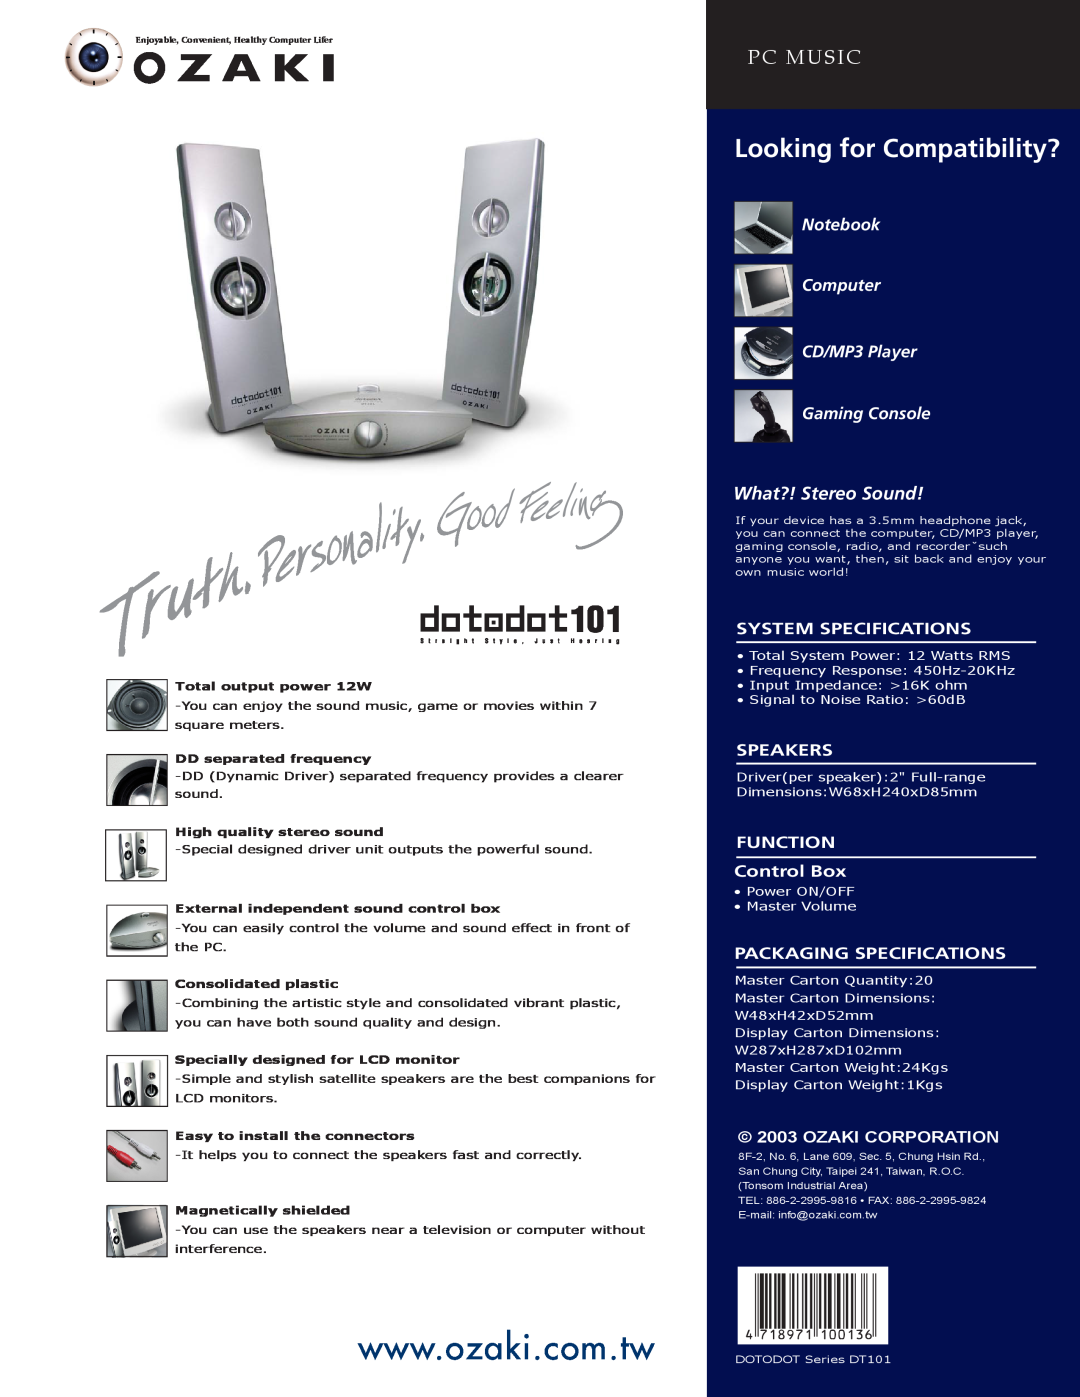 Ozaki Worldwide Dotadot101 Looking for Compatibility?, Pc Music, What?! Stereo Sound, System Specifications, Speakers 